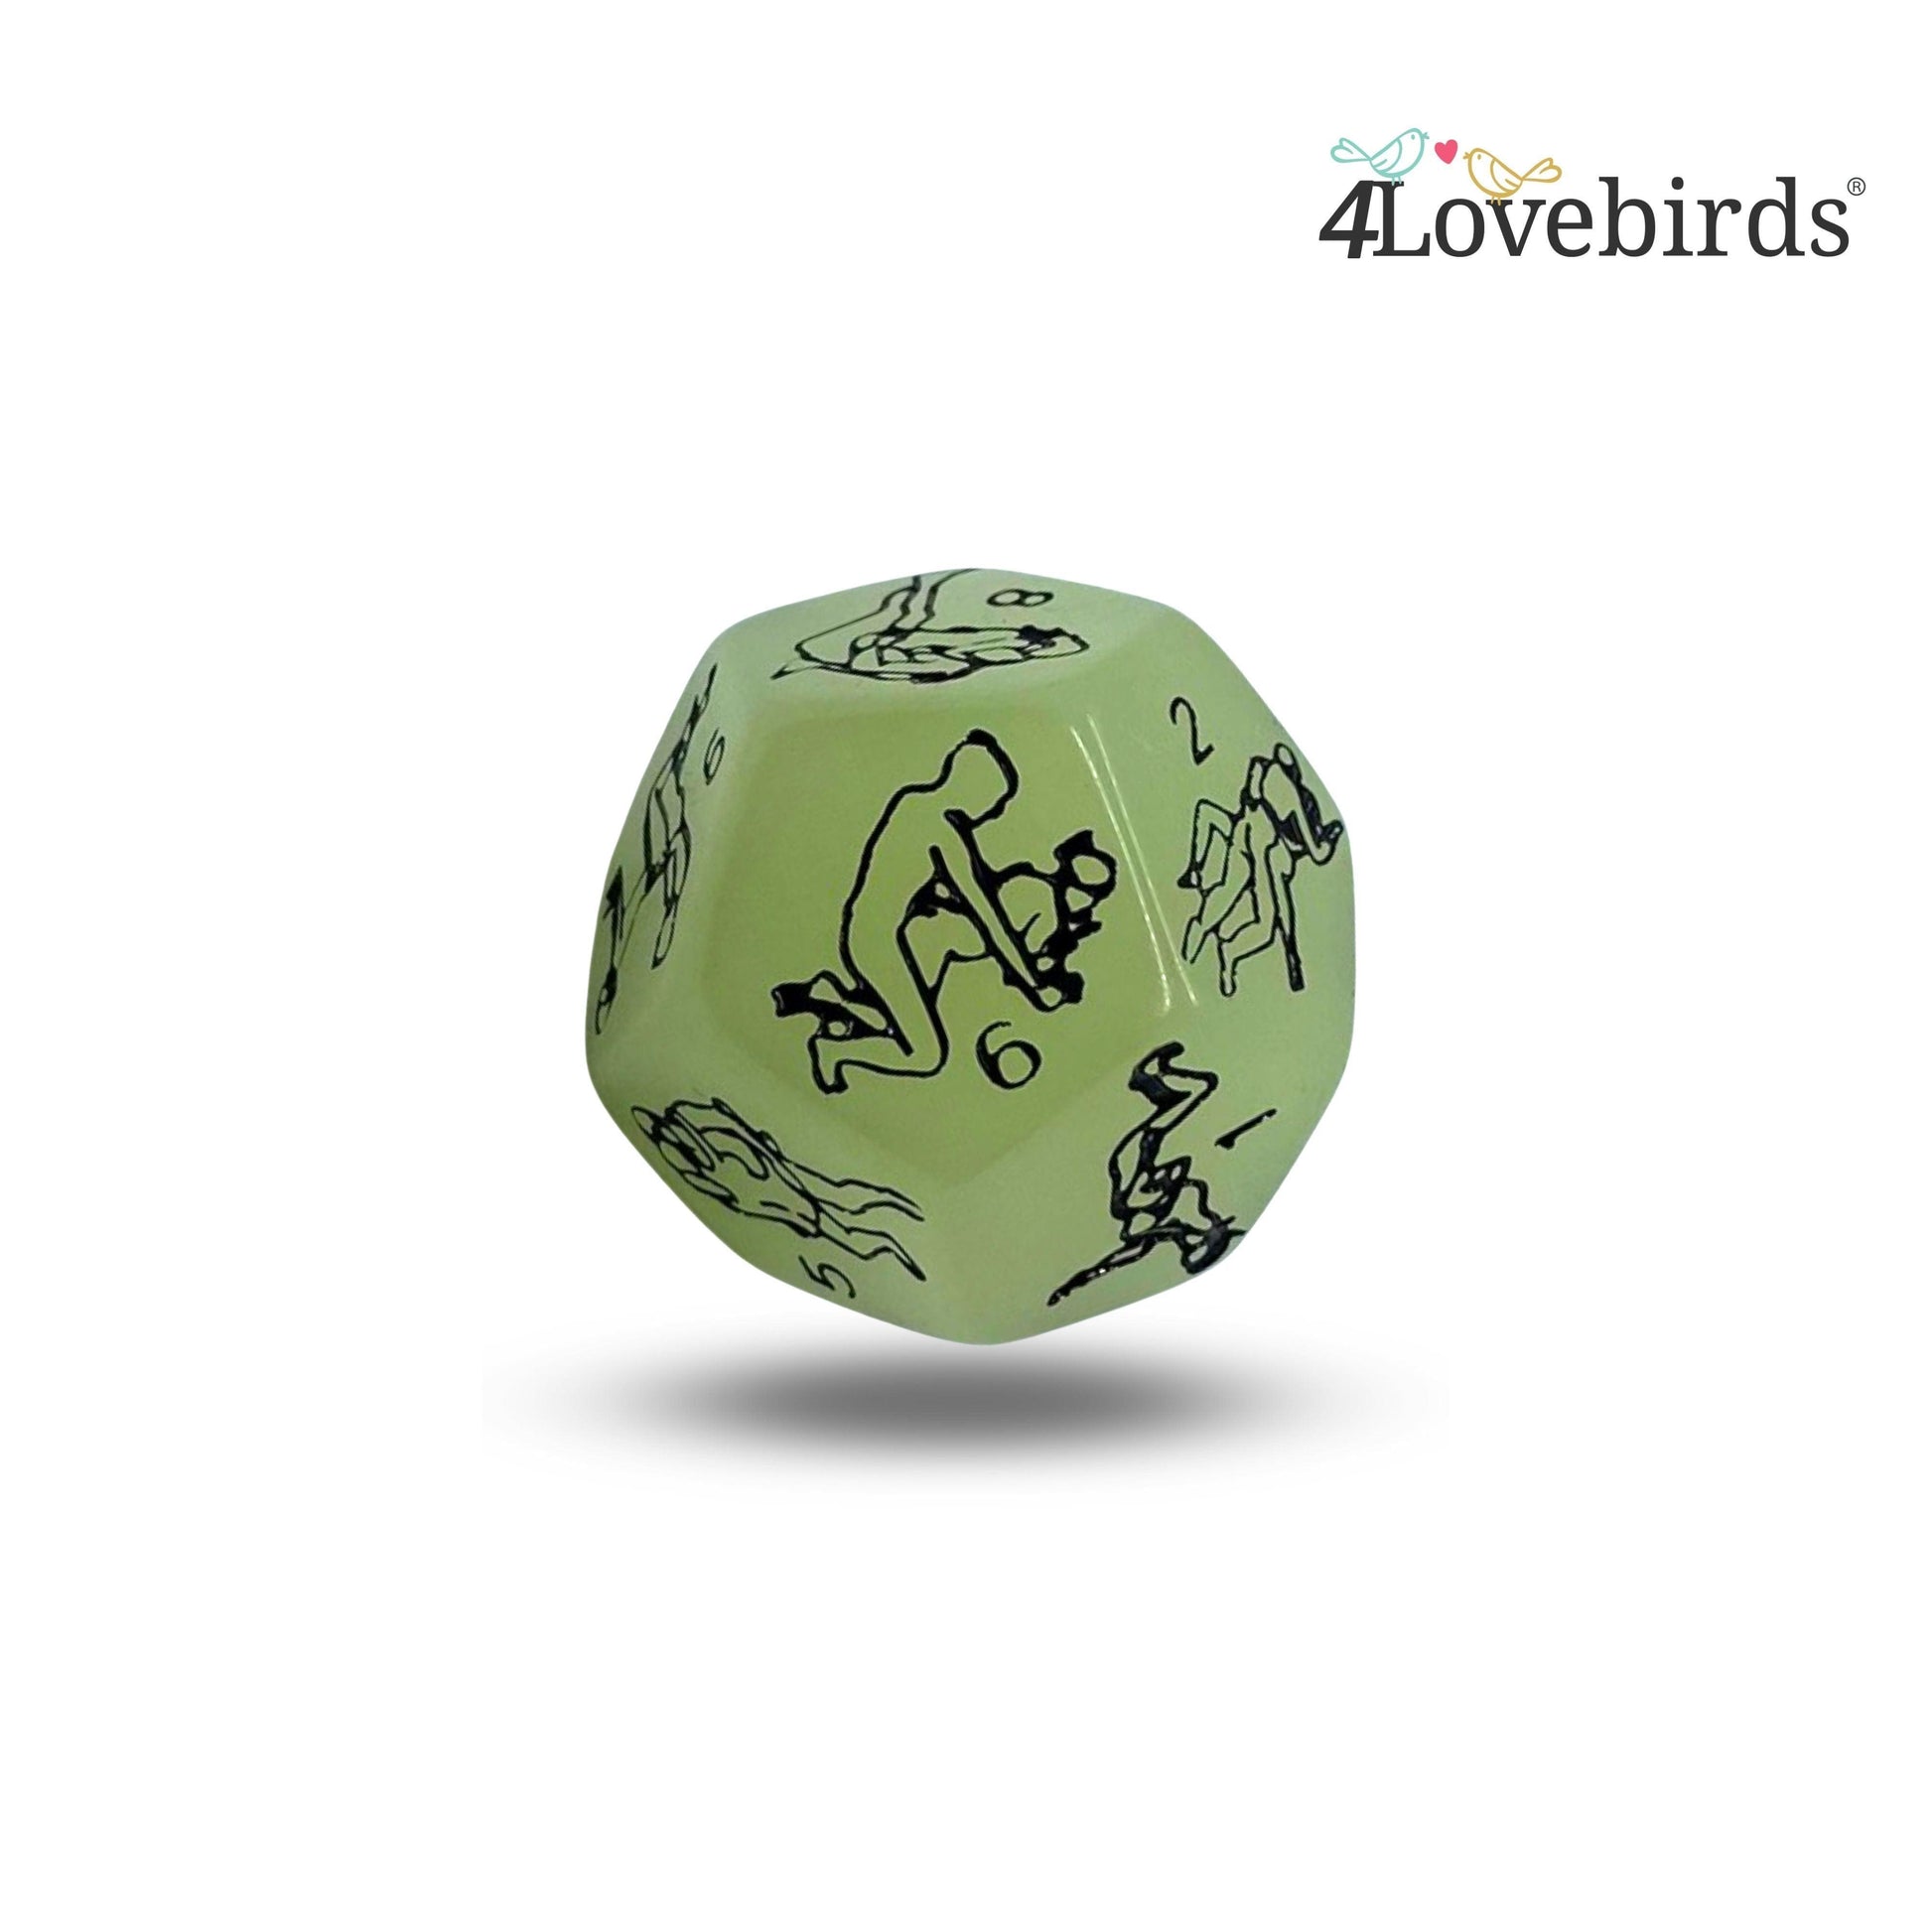 5 Sex Dice, luminous, sex positions, fun in the bedroom, bedroom game, fun game, husband birthday, wife birthday, anniversary gift, valentine’s day - 4Lovebirds